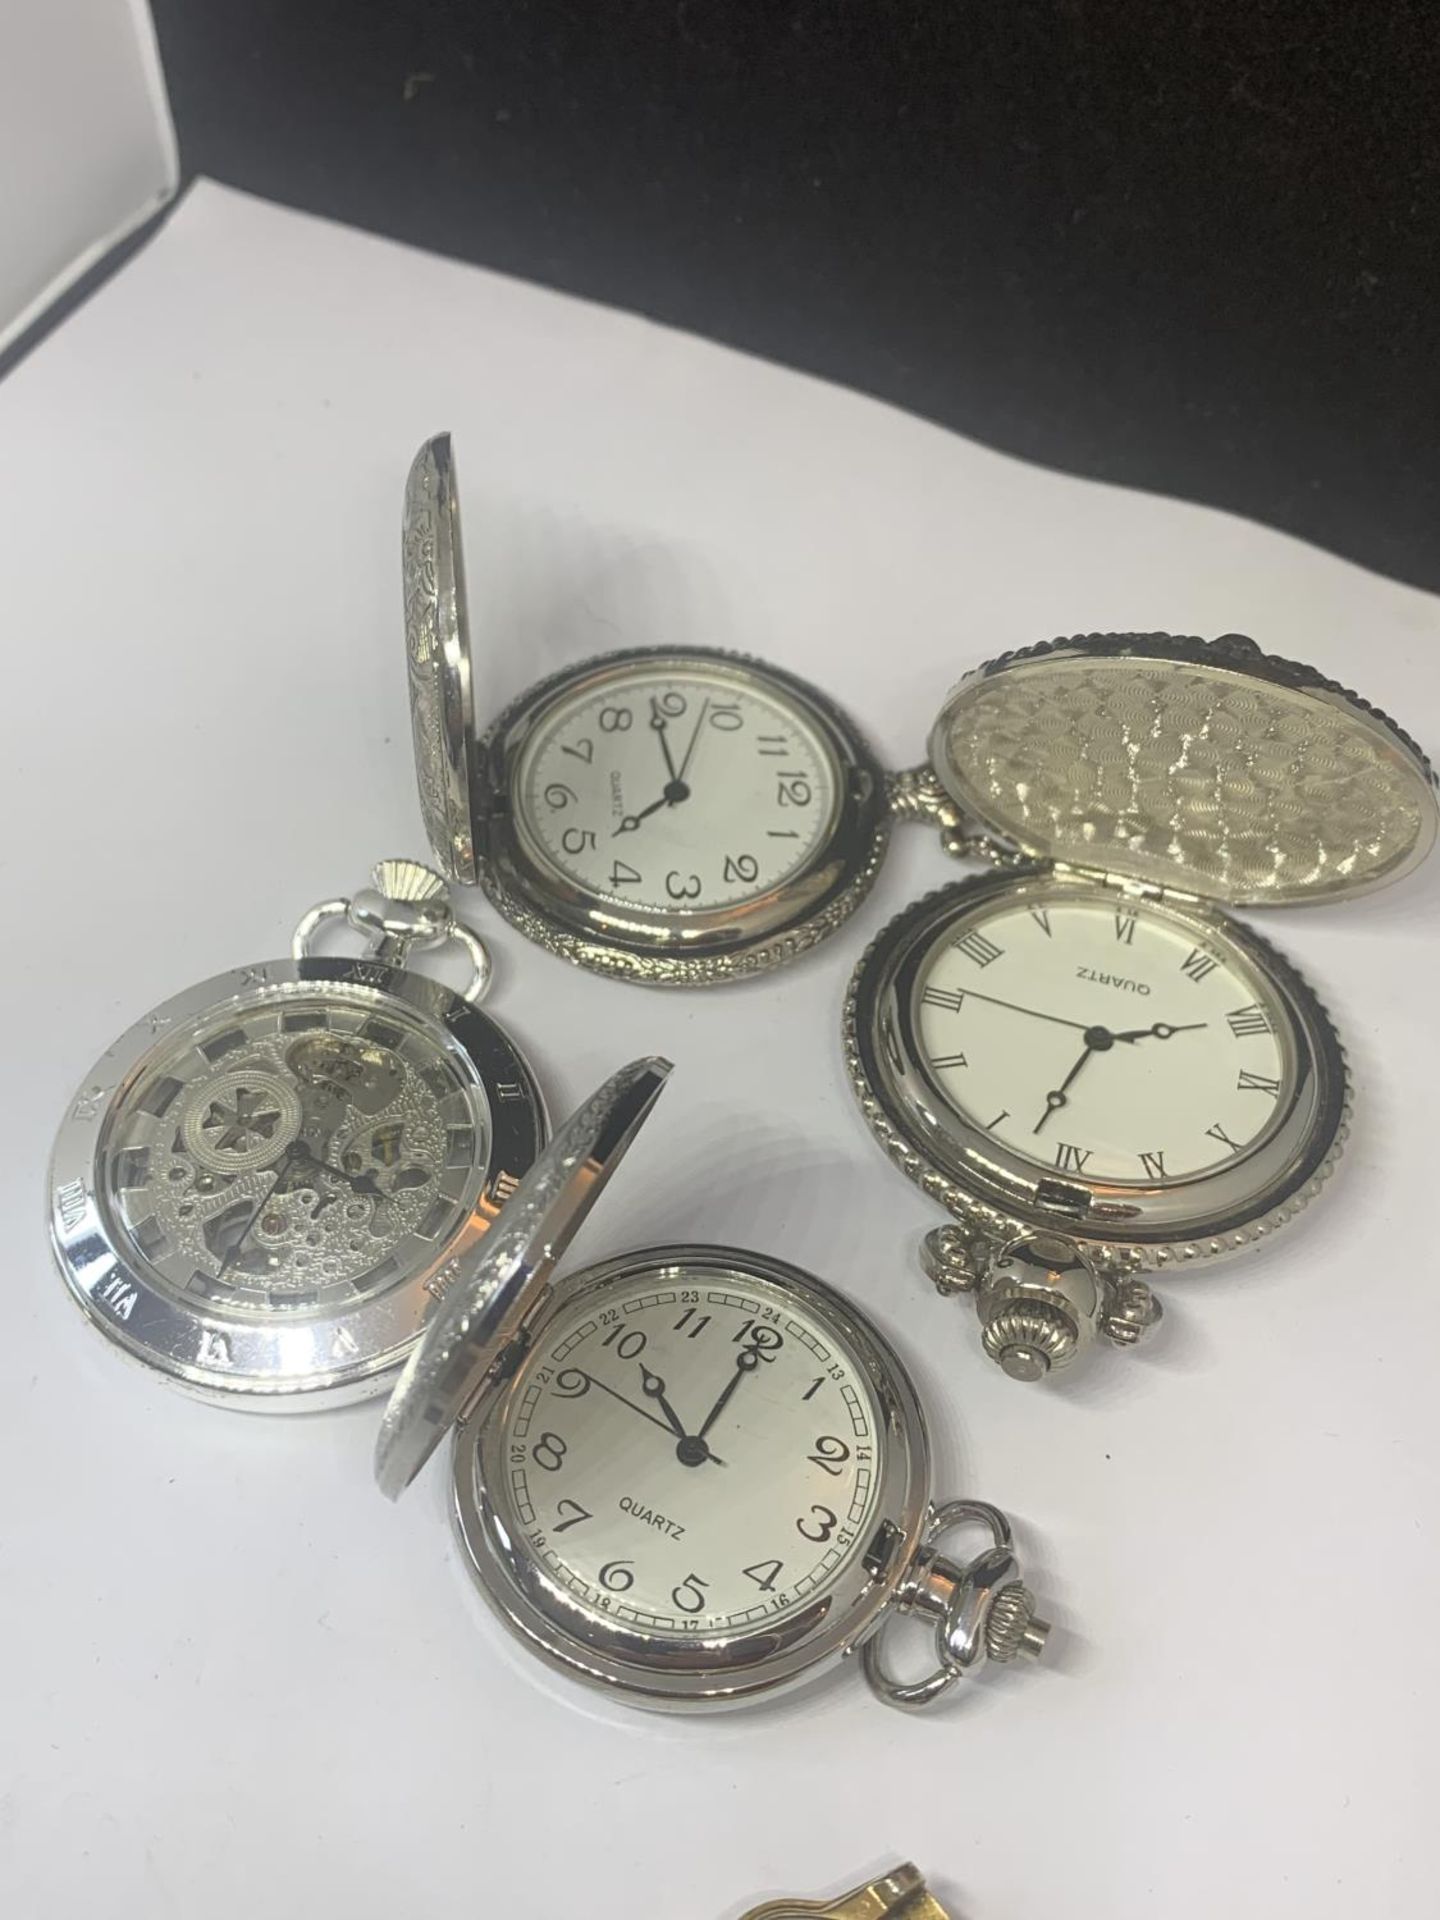 SIX VARIOUS WATCHES TO INCLUDE FOUR WHITE METAL POCKET WATCHES AND TWO WRIST WATCHES WITHOUT STRAPS - Image 3 of 3